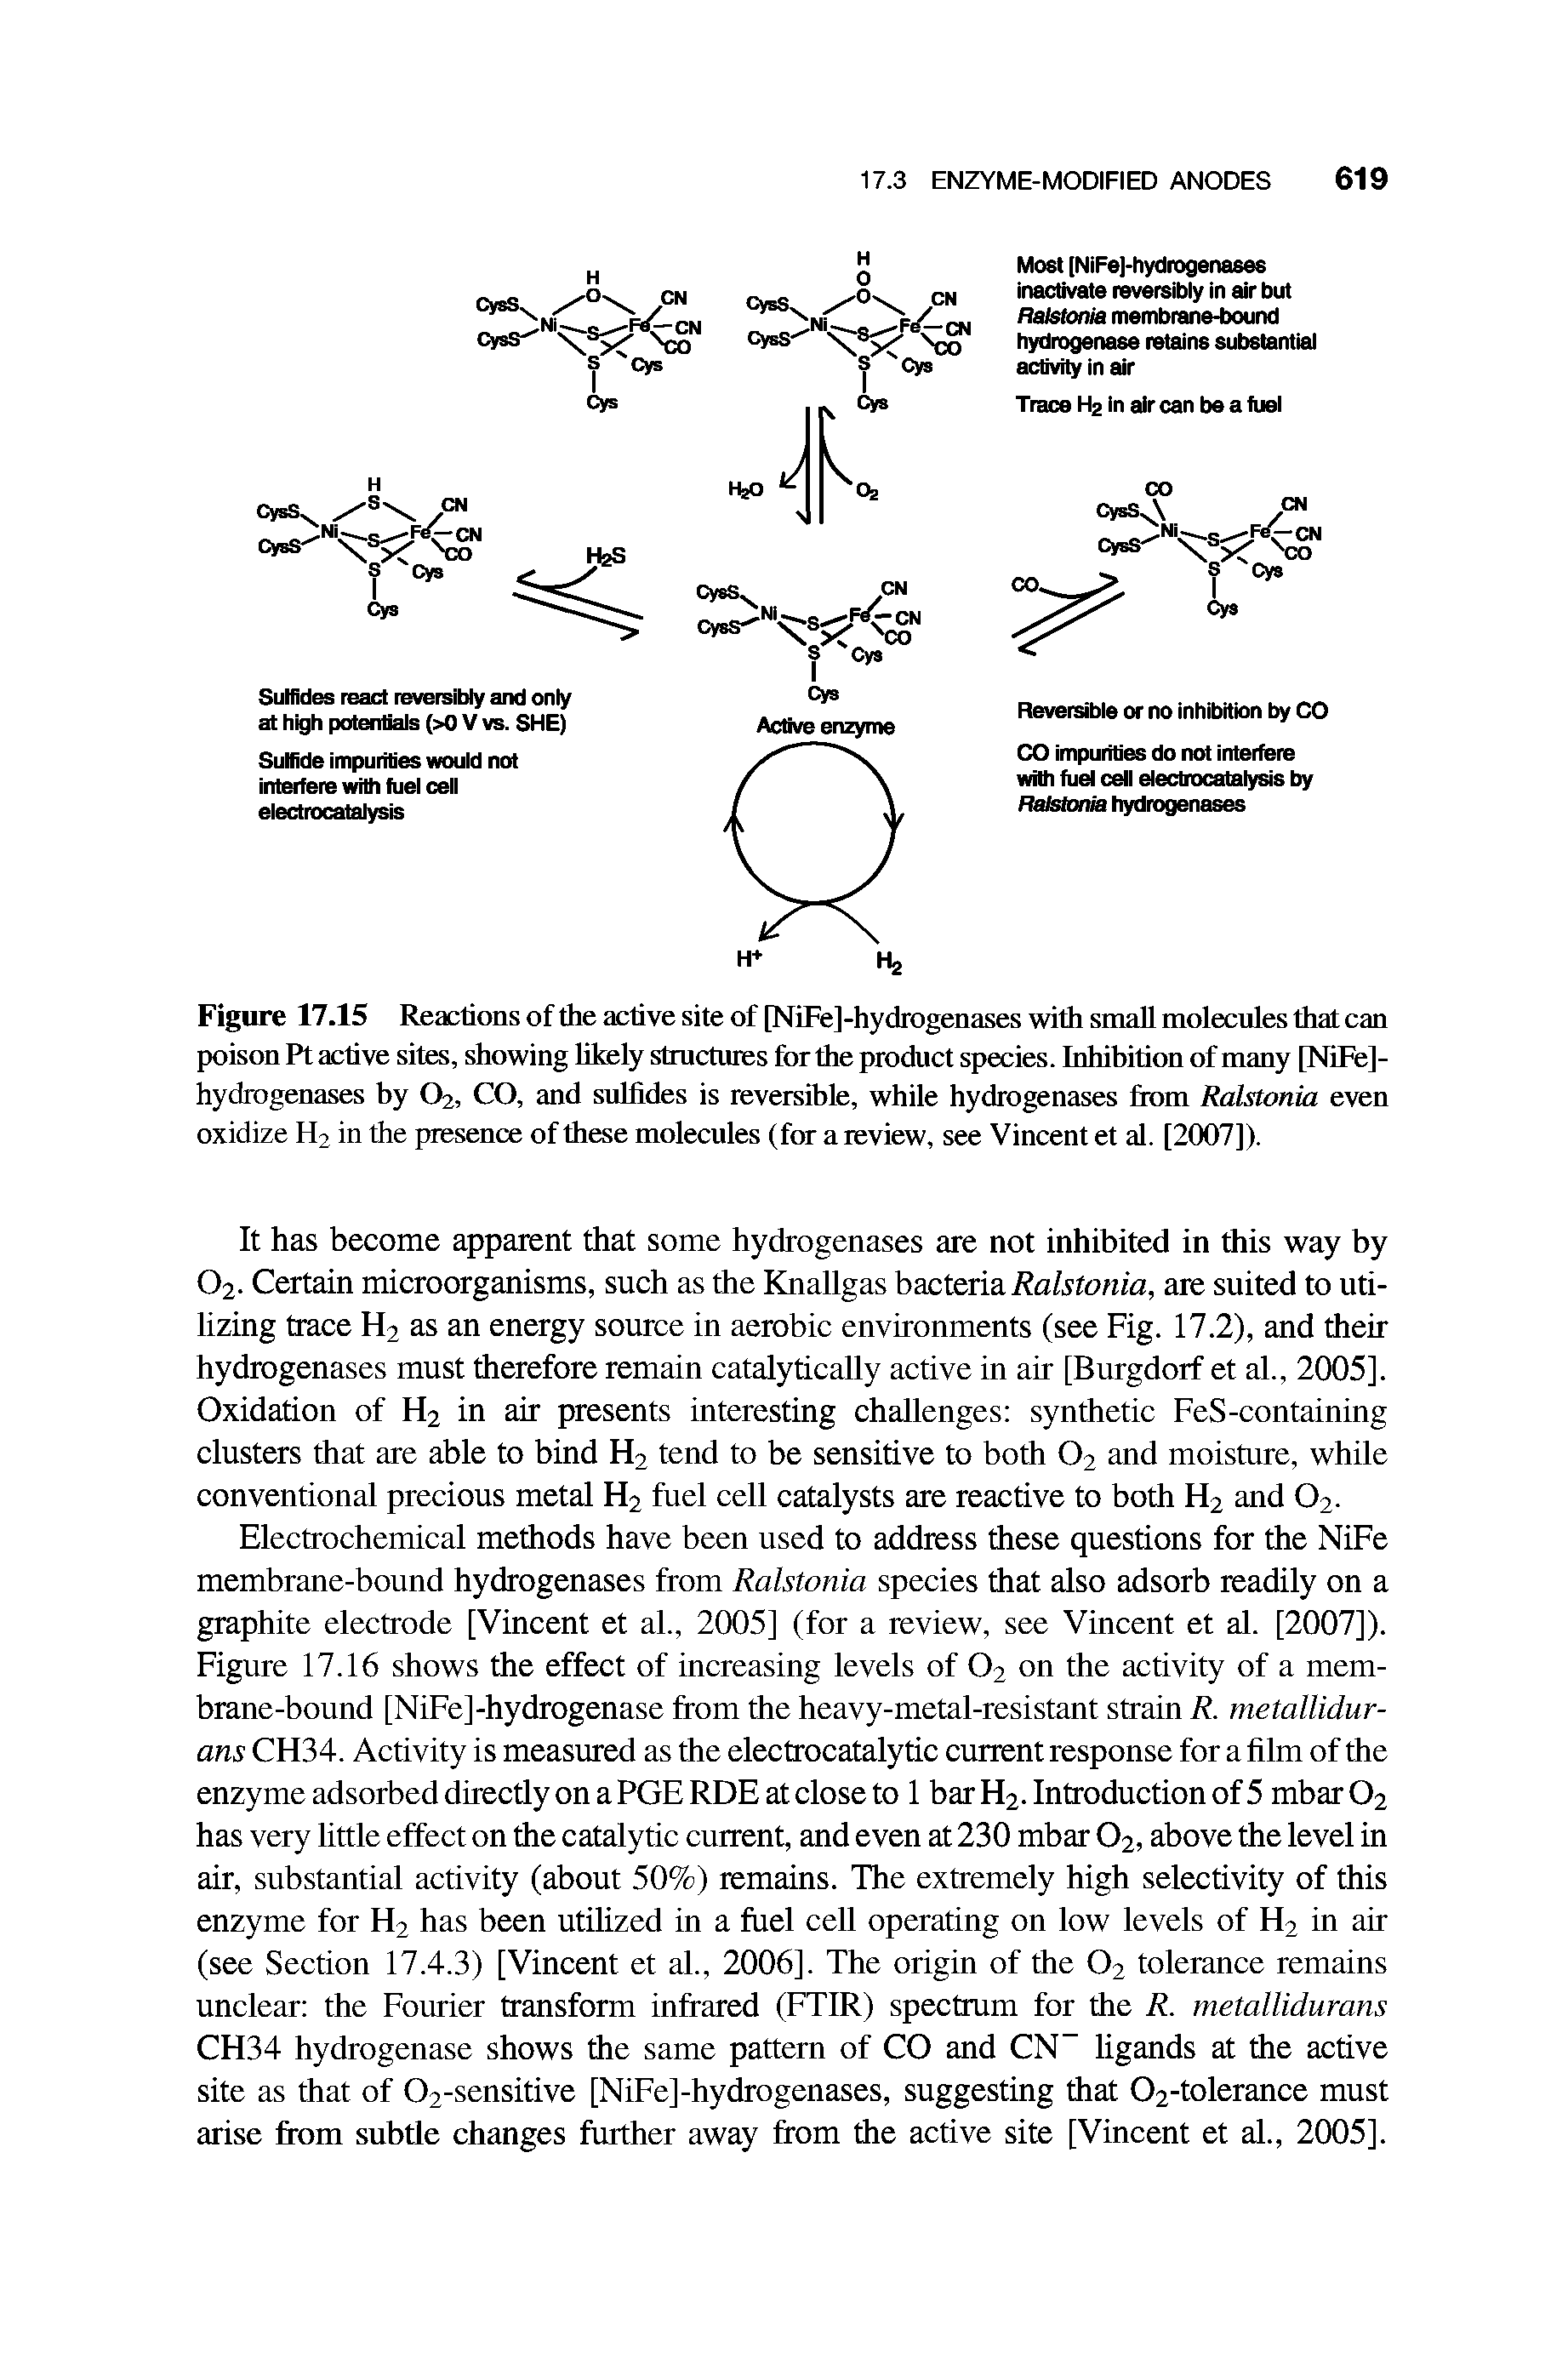 Figure 17.15 Reactions of the active site of [NiFe]-hydrogenases with small molecules that can poison Pt active sites, showing likely structures for the product species. Inhihition of many [NiFe]-hydrogenases hy O2, CO, and sulhdes is reversible, while hydrogenases from Ralstonia even oxidize H2 in the presence of these molecules (for a review, see Vincent et al. [2(X)7]).